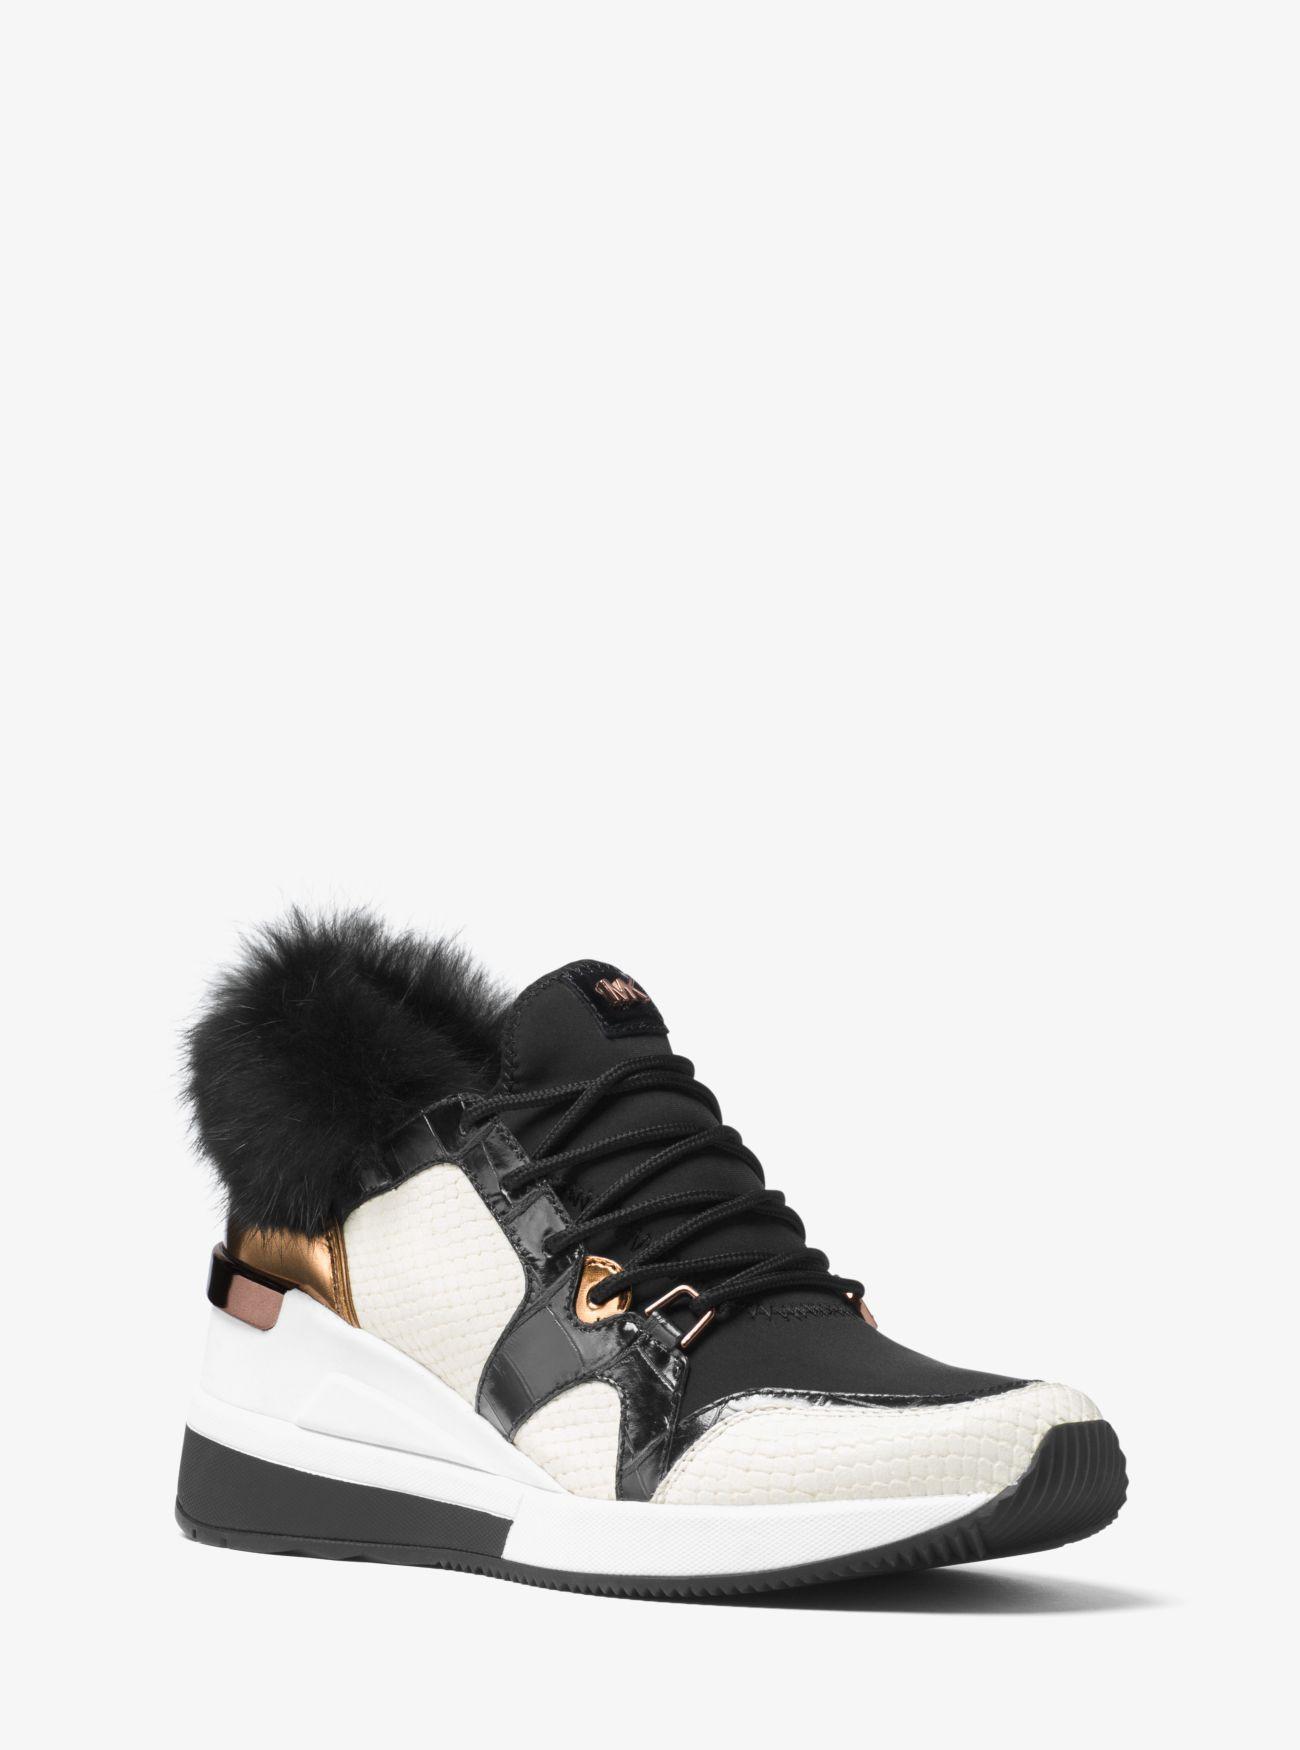 black and white michael kors sneakers